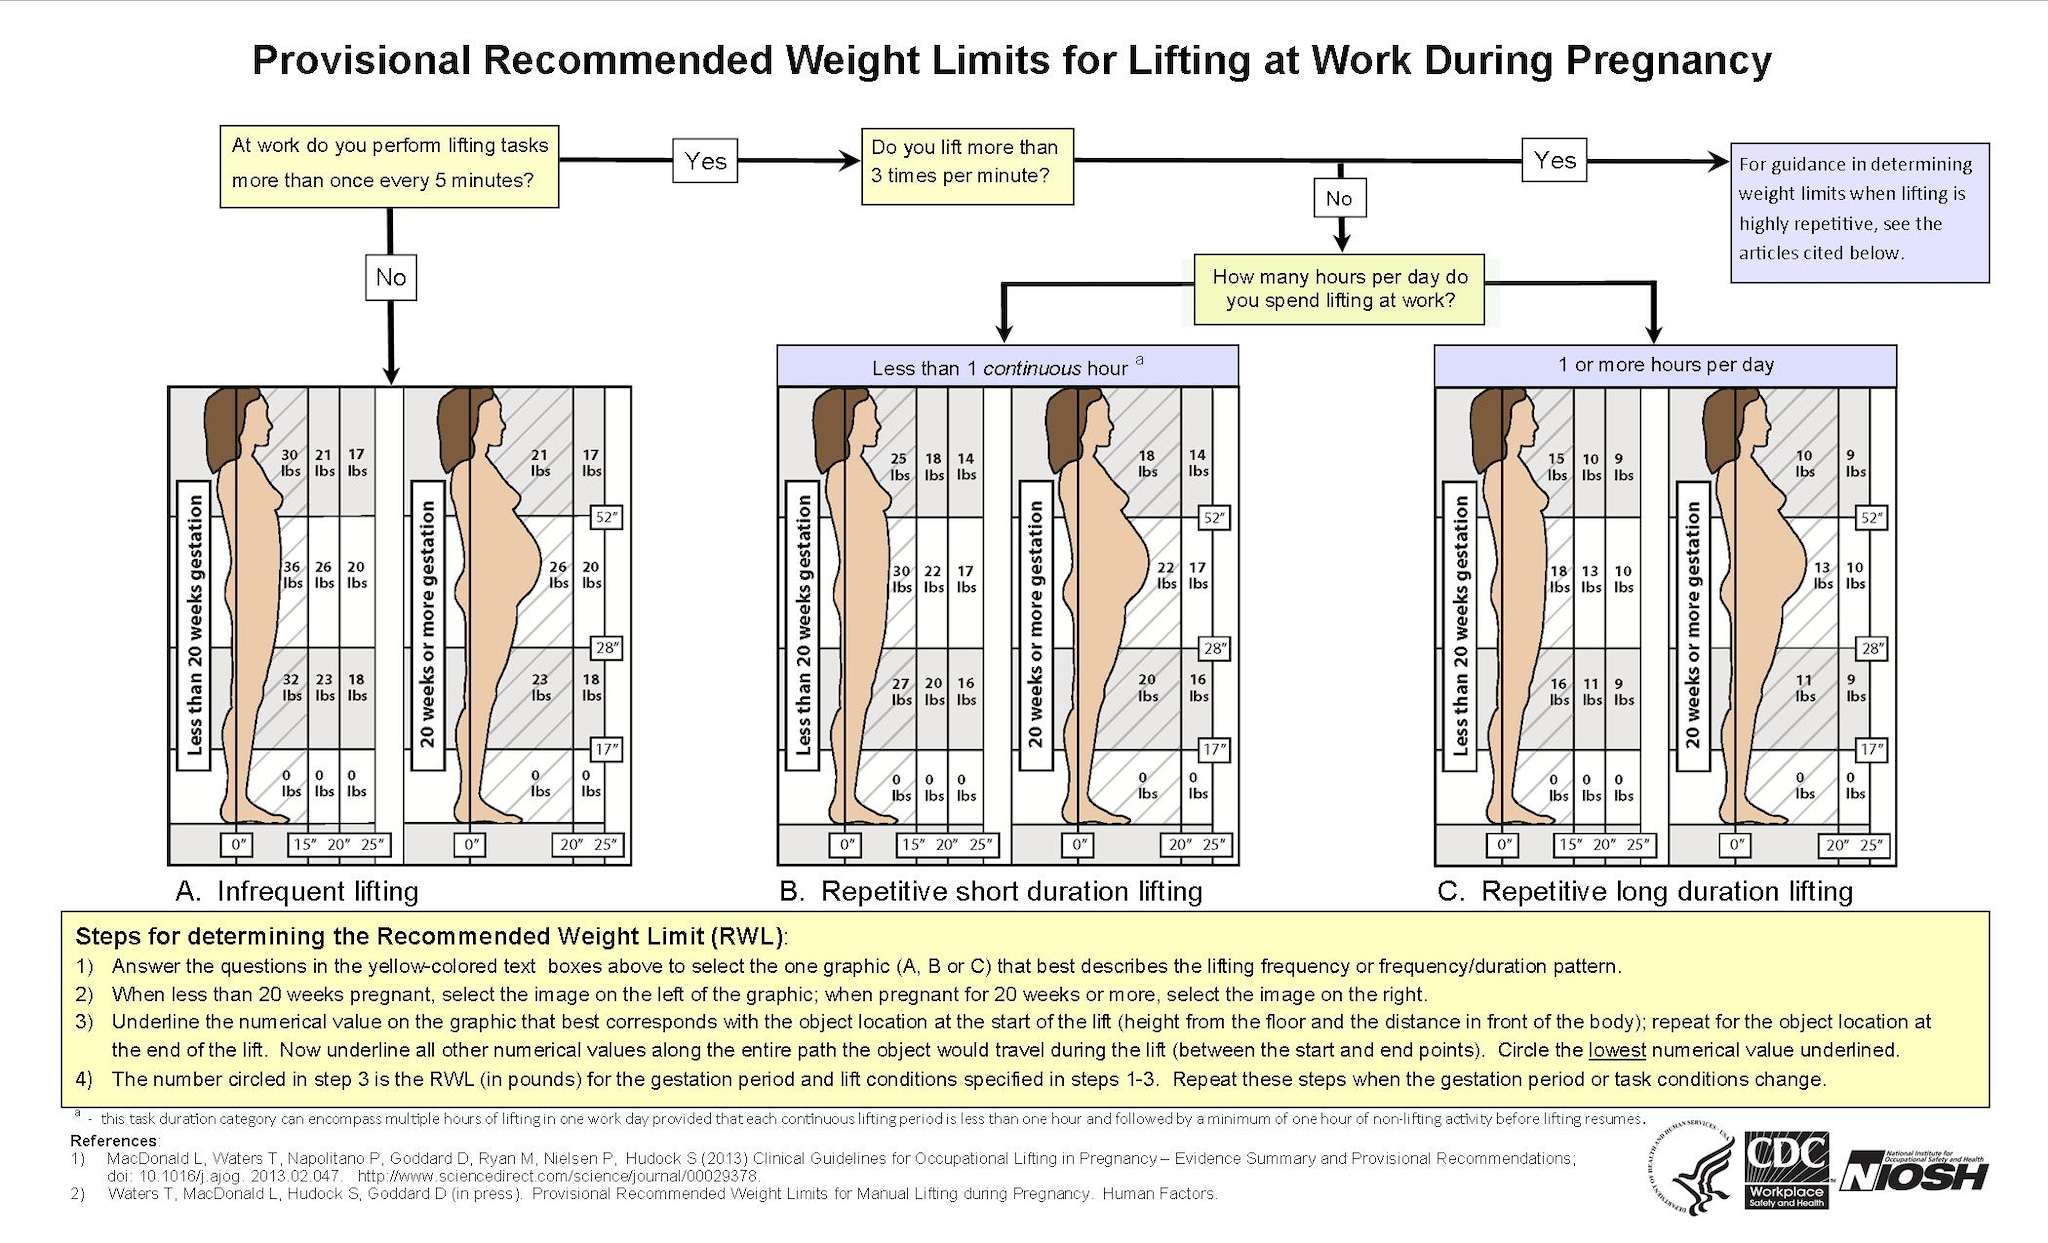 Physical Demands (lifting, standing, bending) - Reproductive